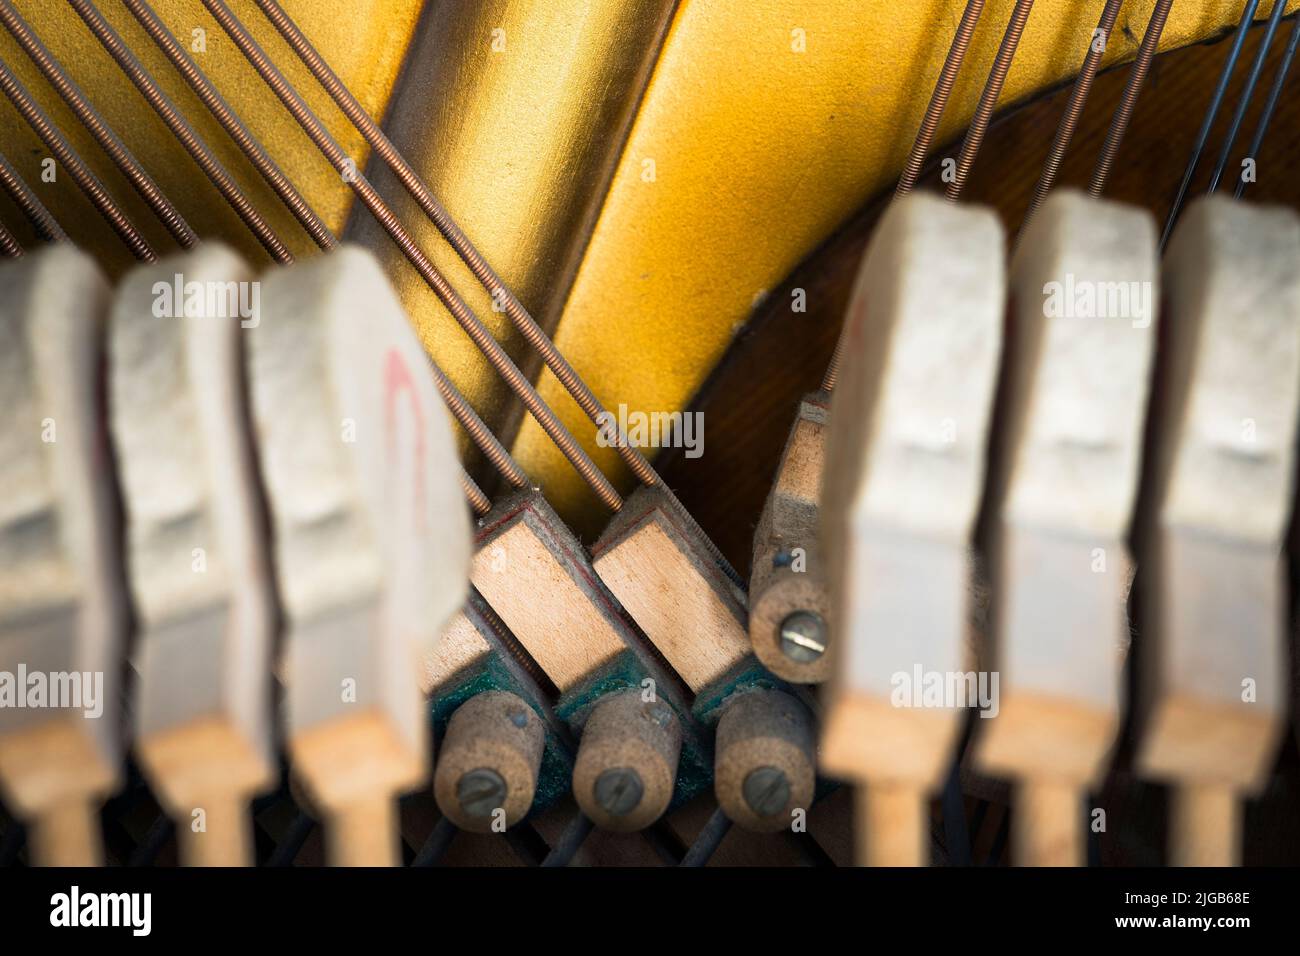 Dampers of an upright piano framed by hammers Stock Photo